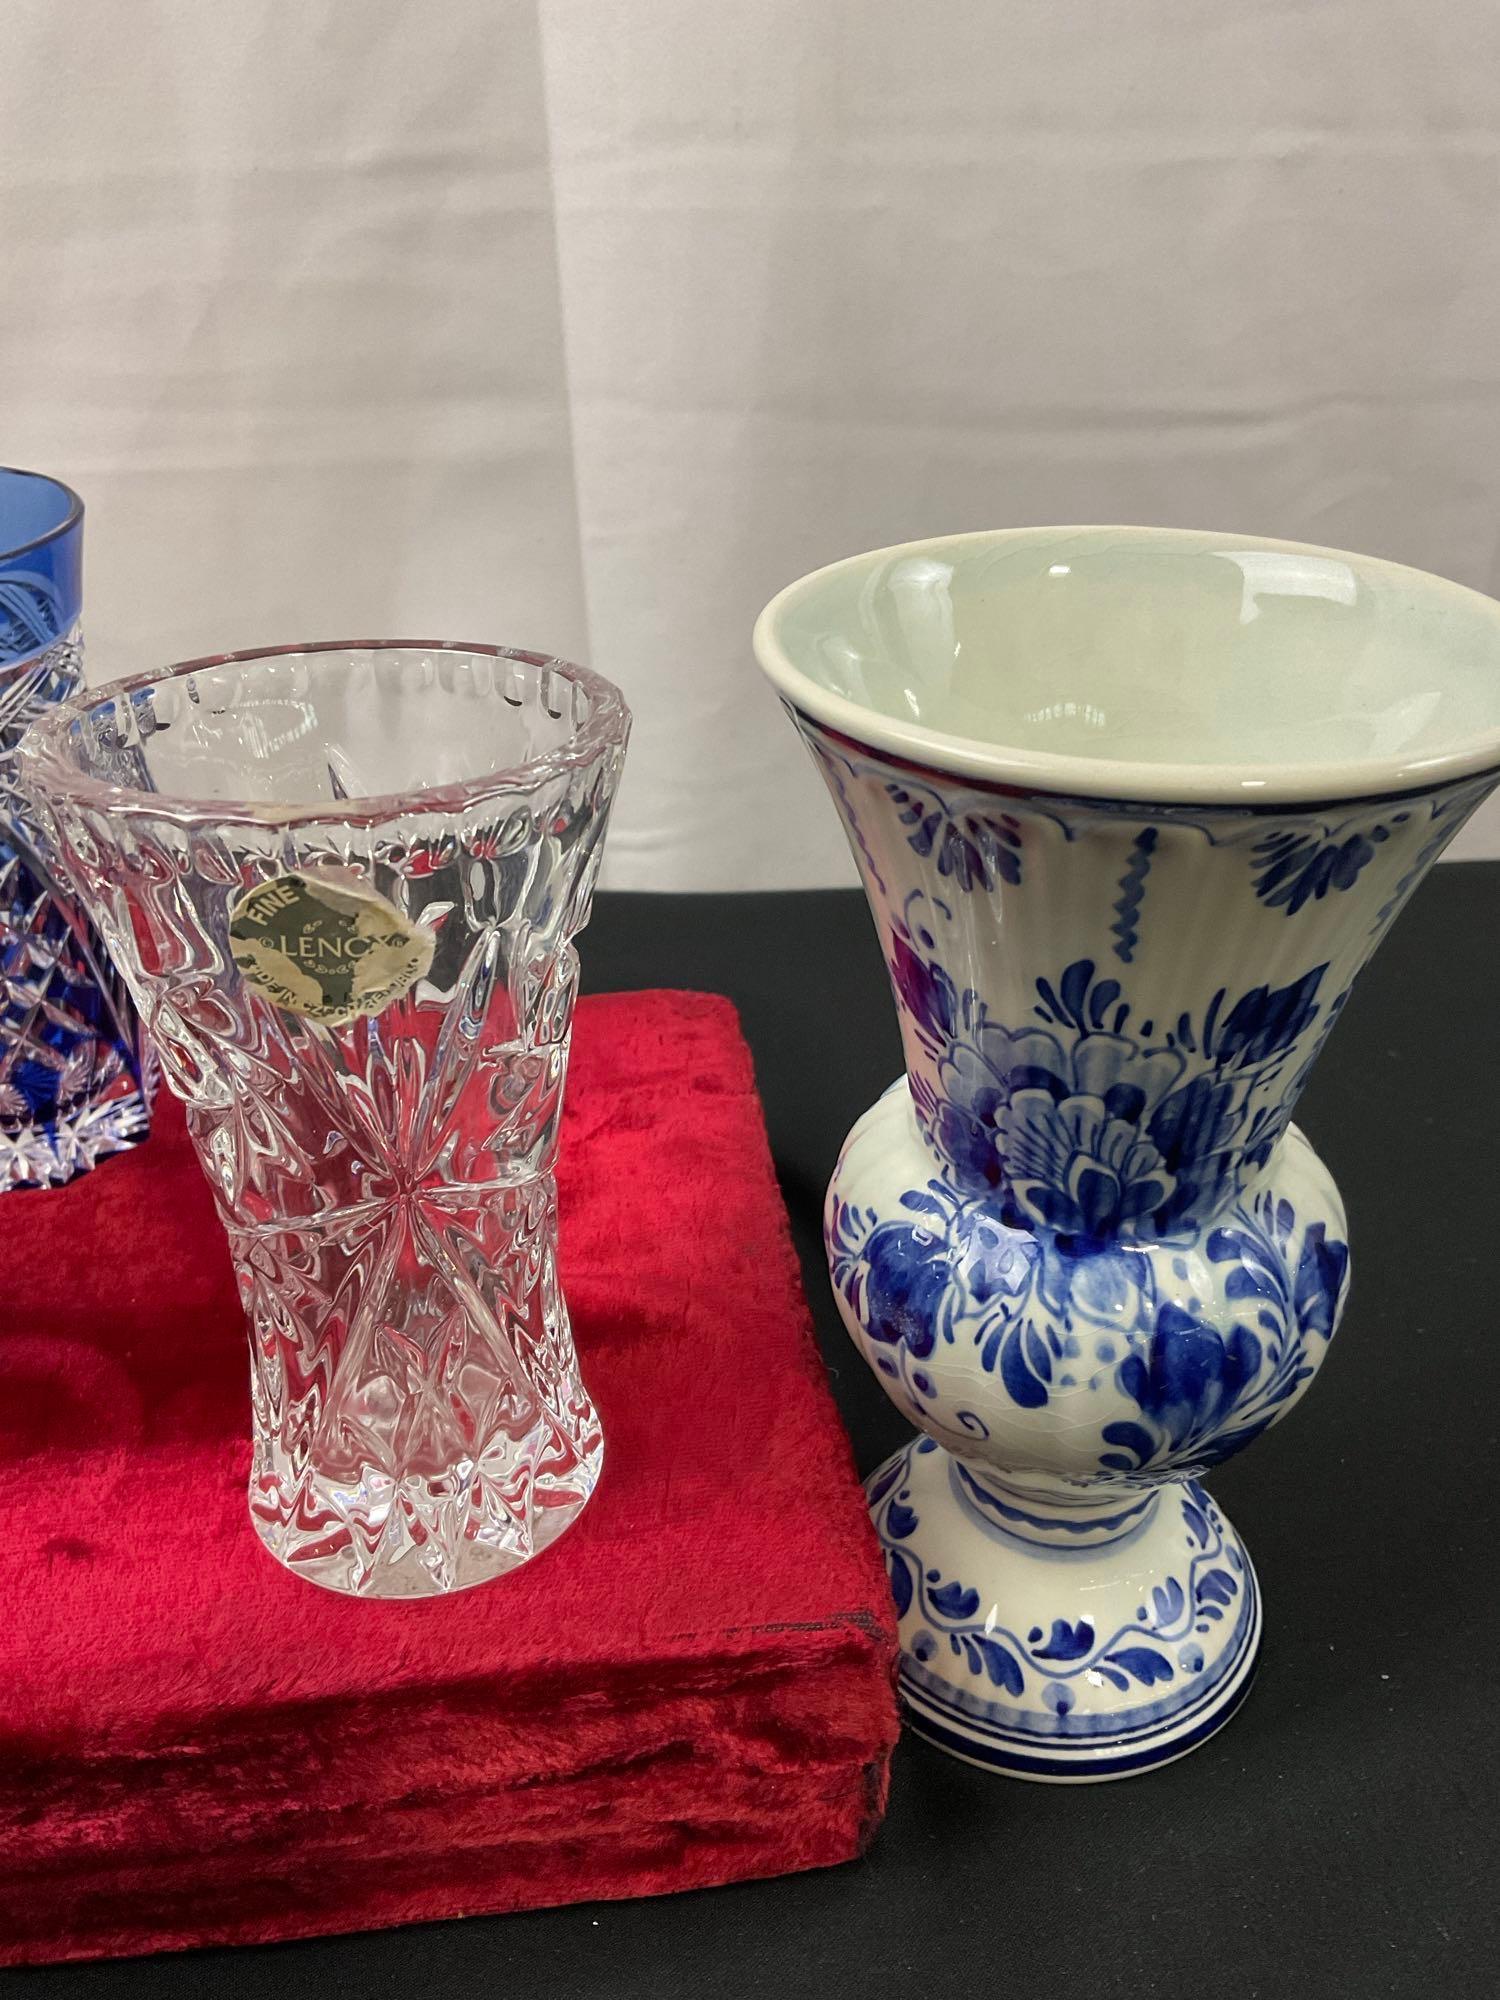 Assorted Small Vases, Etched Czech Crystal, Handpainted Delft, Lenox, and more